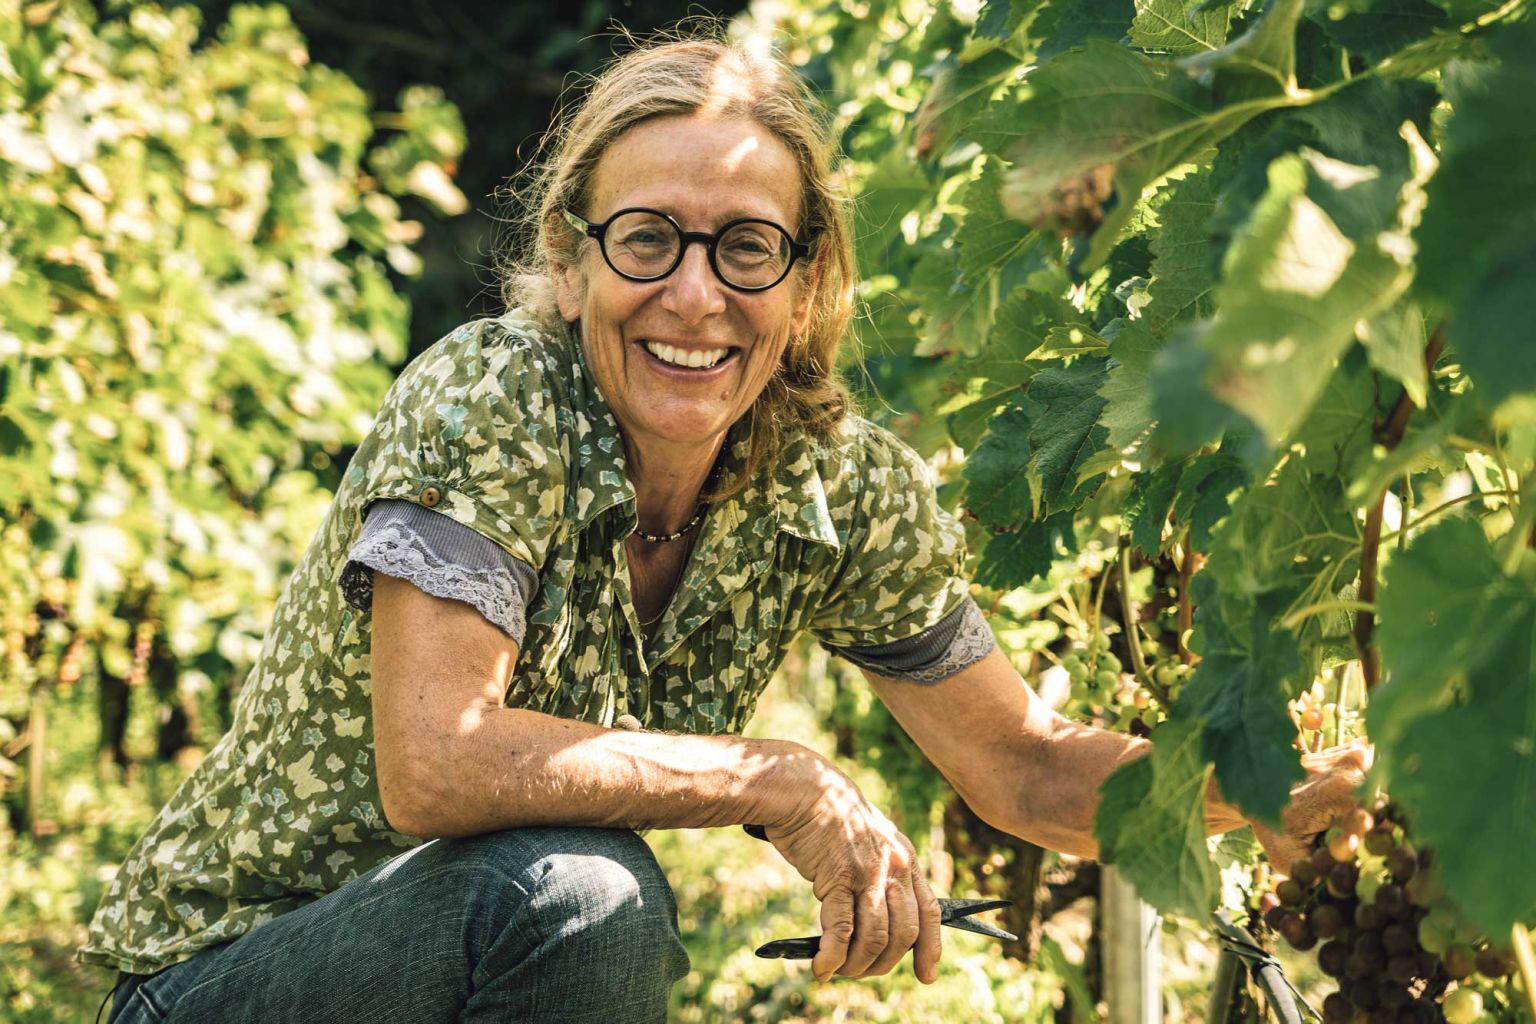 The winegrower Marie Thérèse Chappaz in her vineyard in Fully, Valais, Switzerland